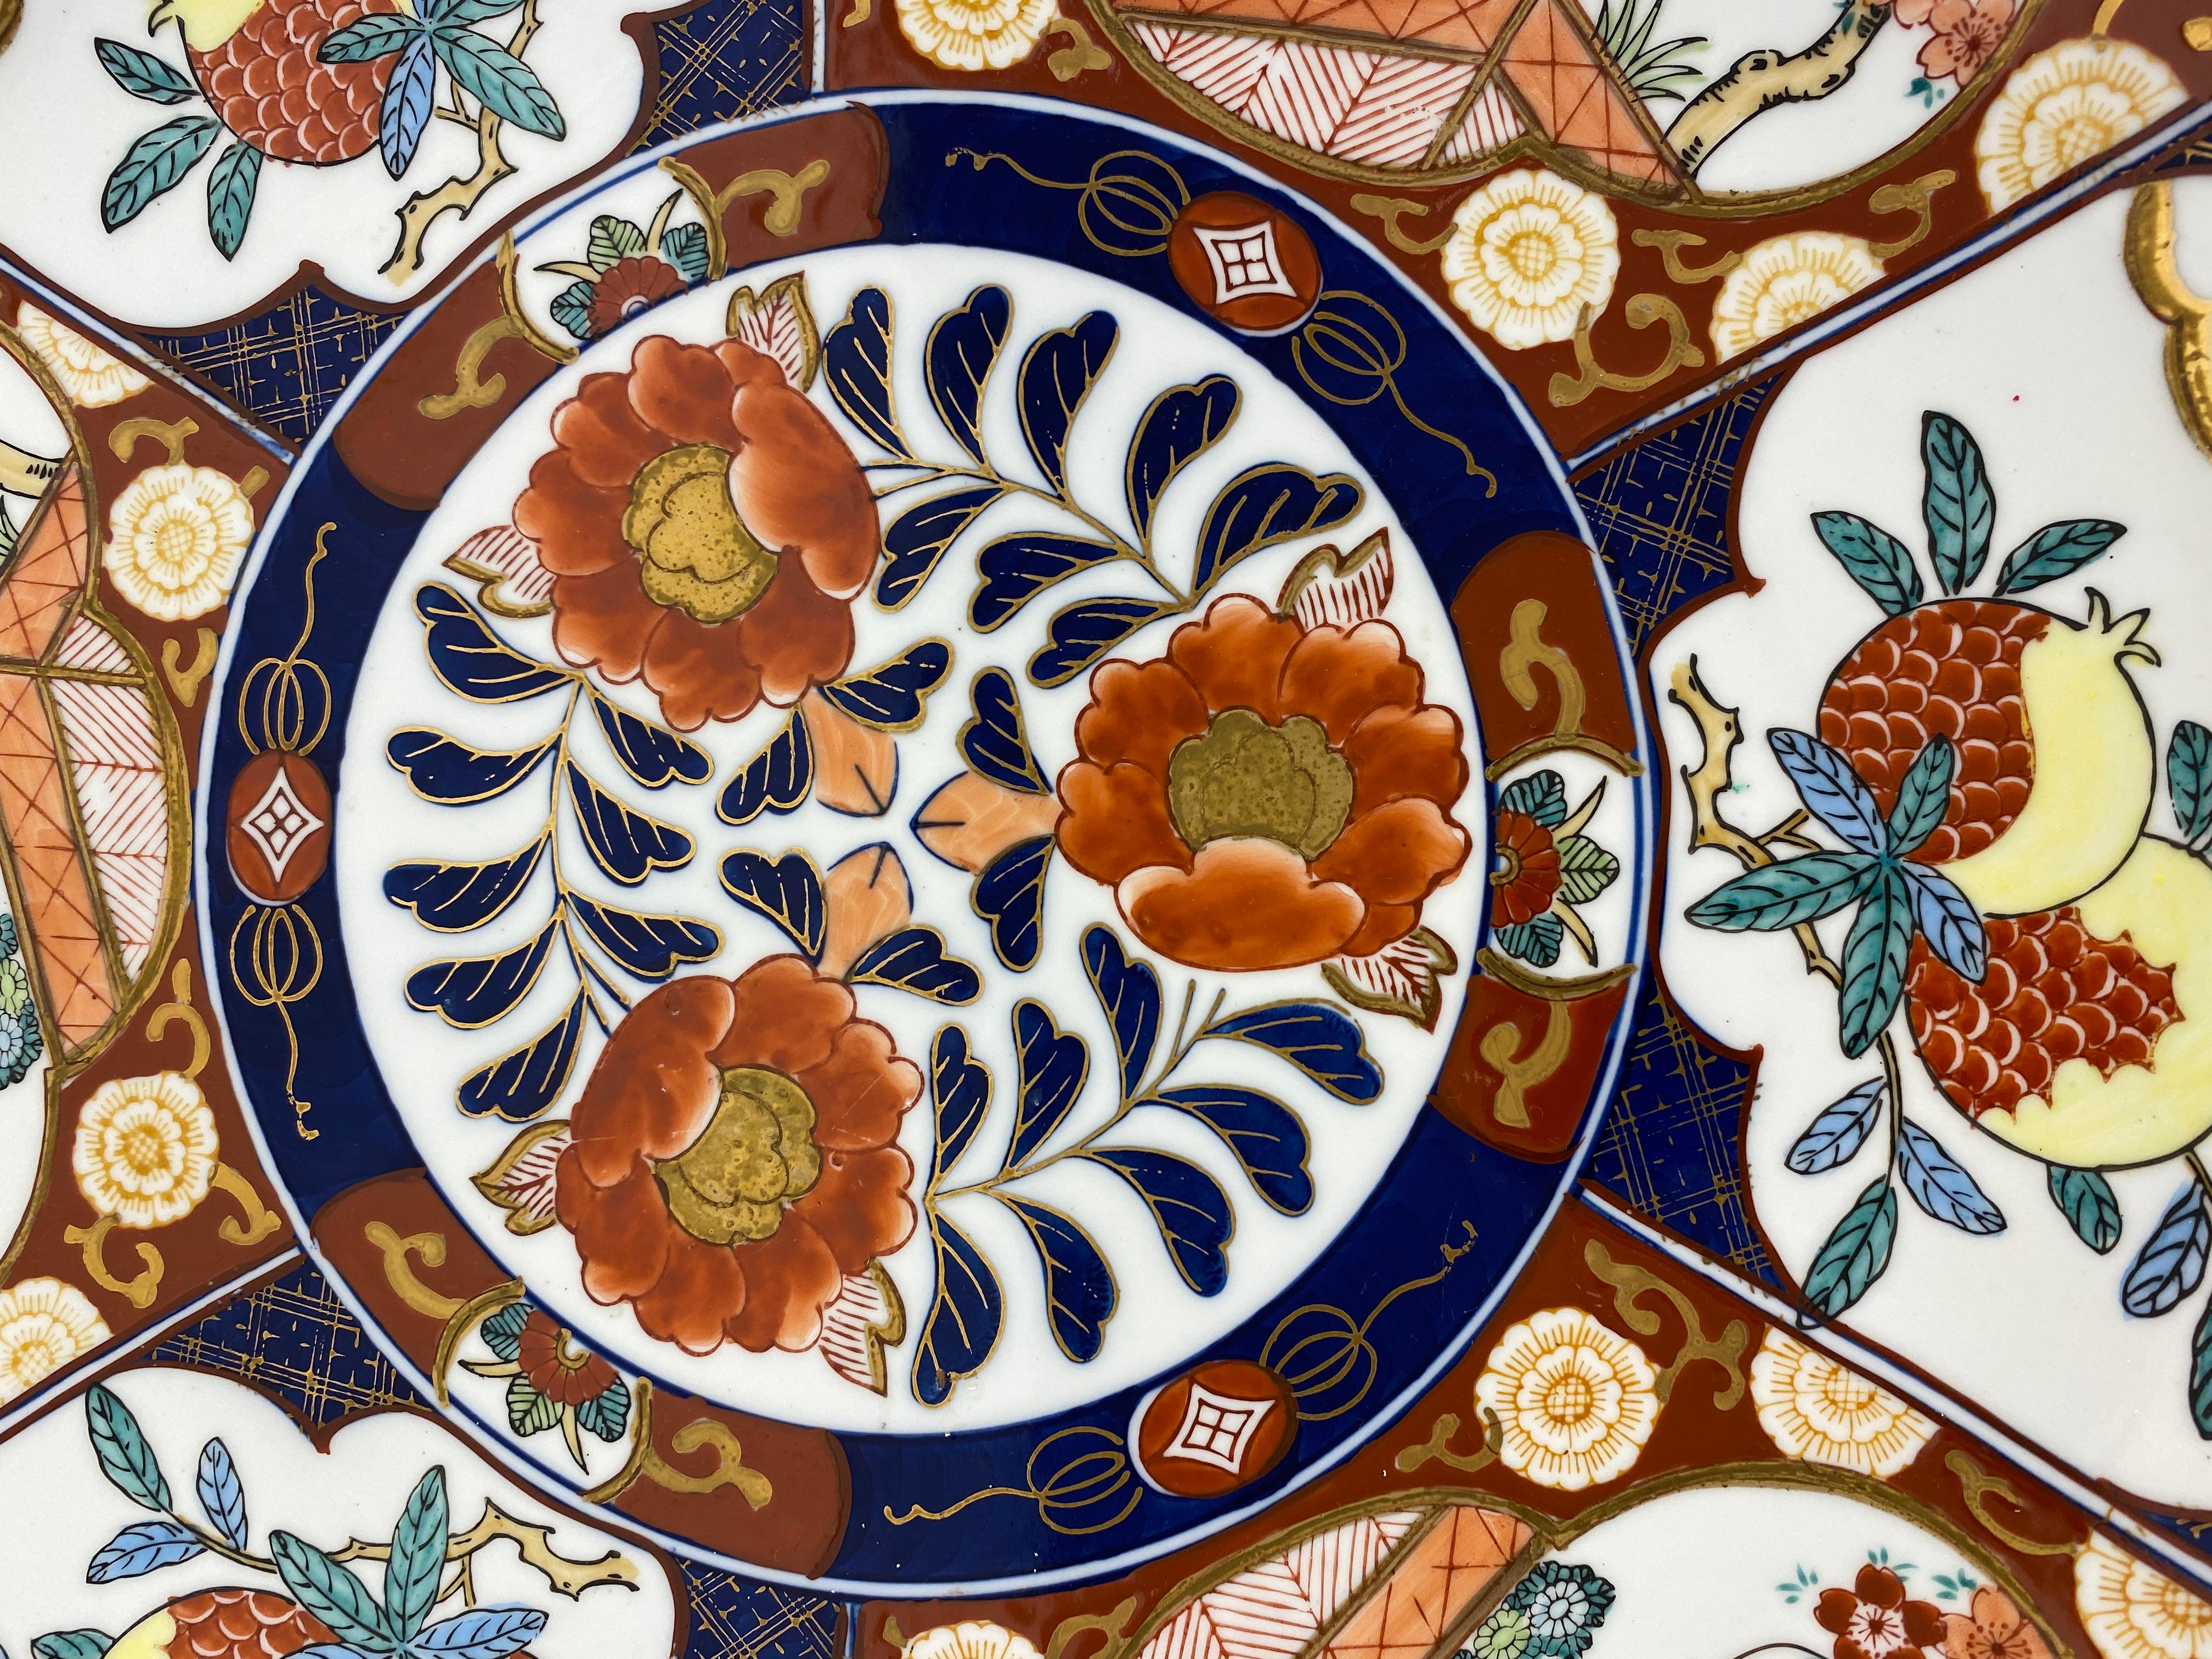 A fine Japanese Imari charger, platter or bowl. This wonderfully hand crafted decorative item is in the very good vintage condition. With an overall floral decoration in blue, orange and green colors this piece would enhance any shelf, countertop or